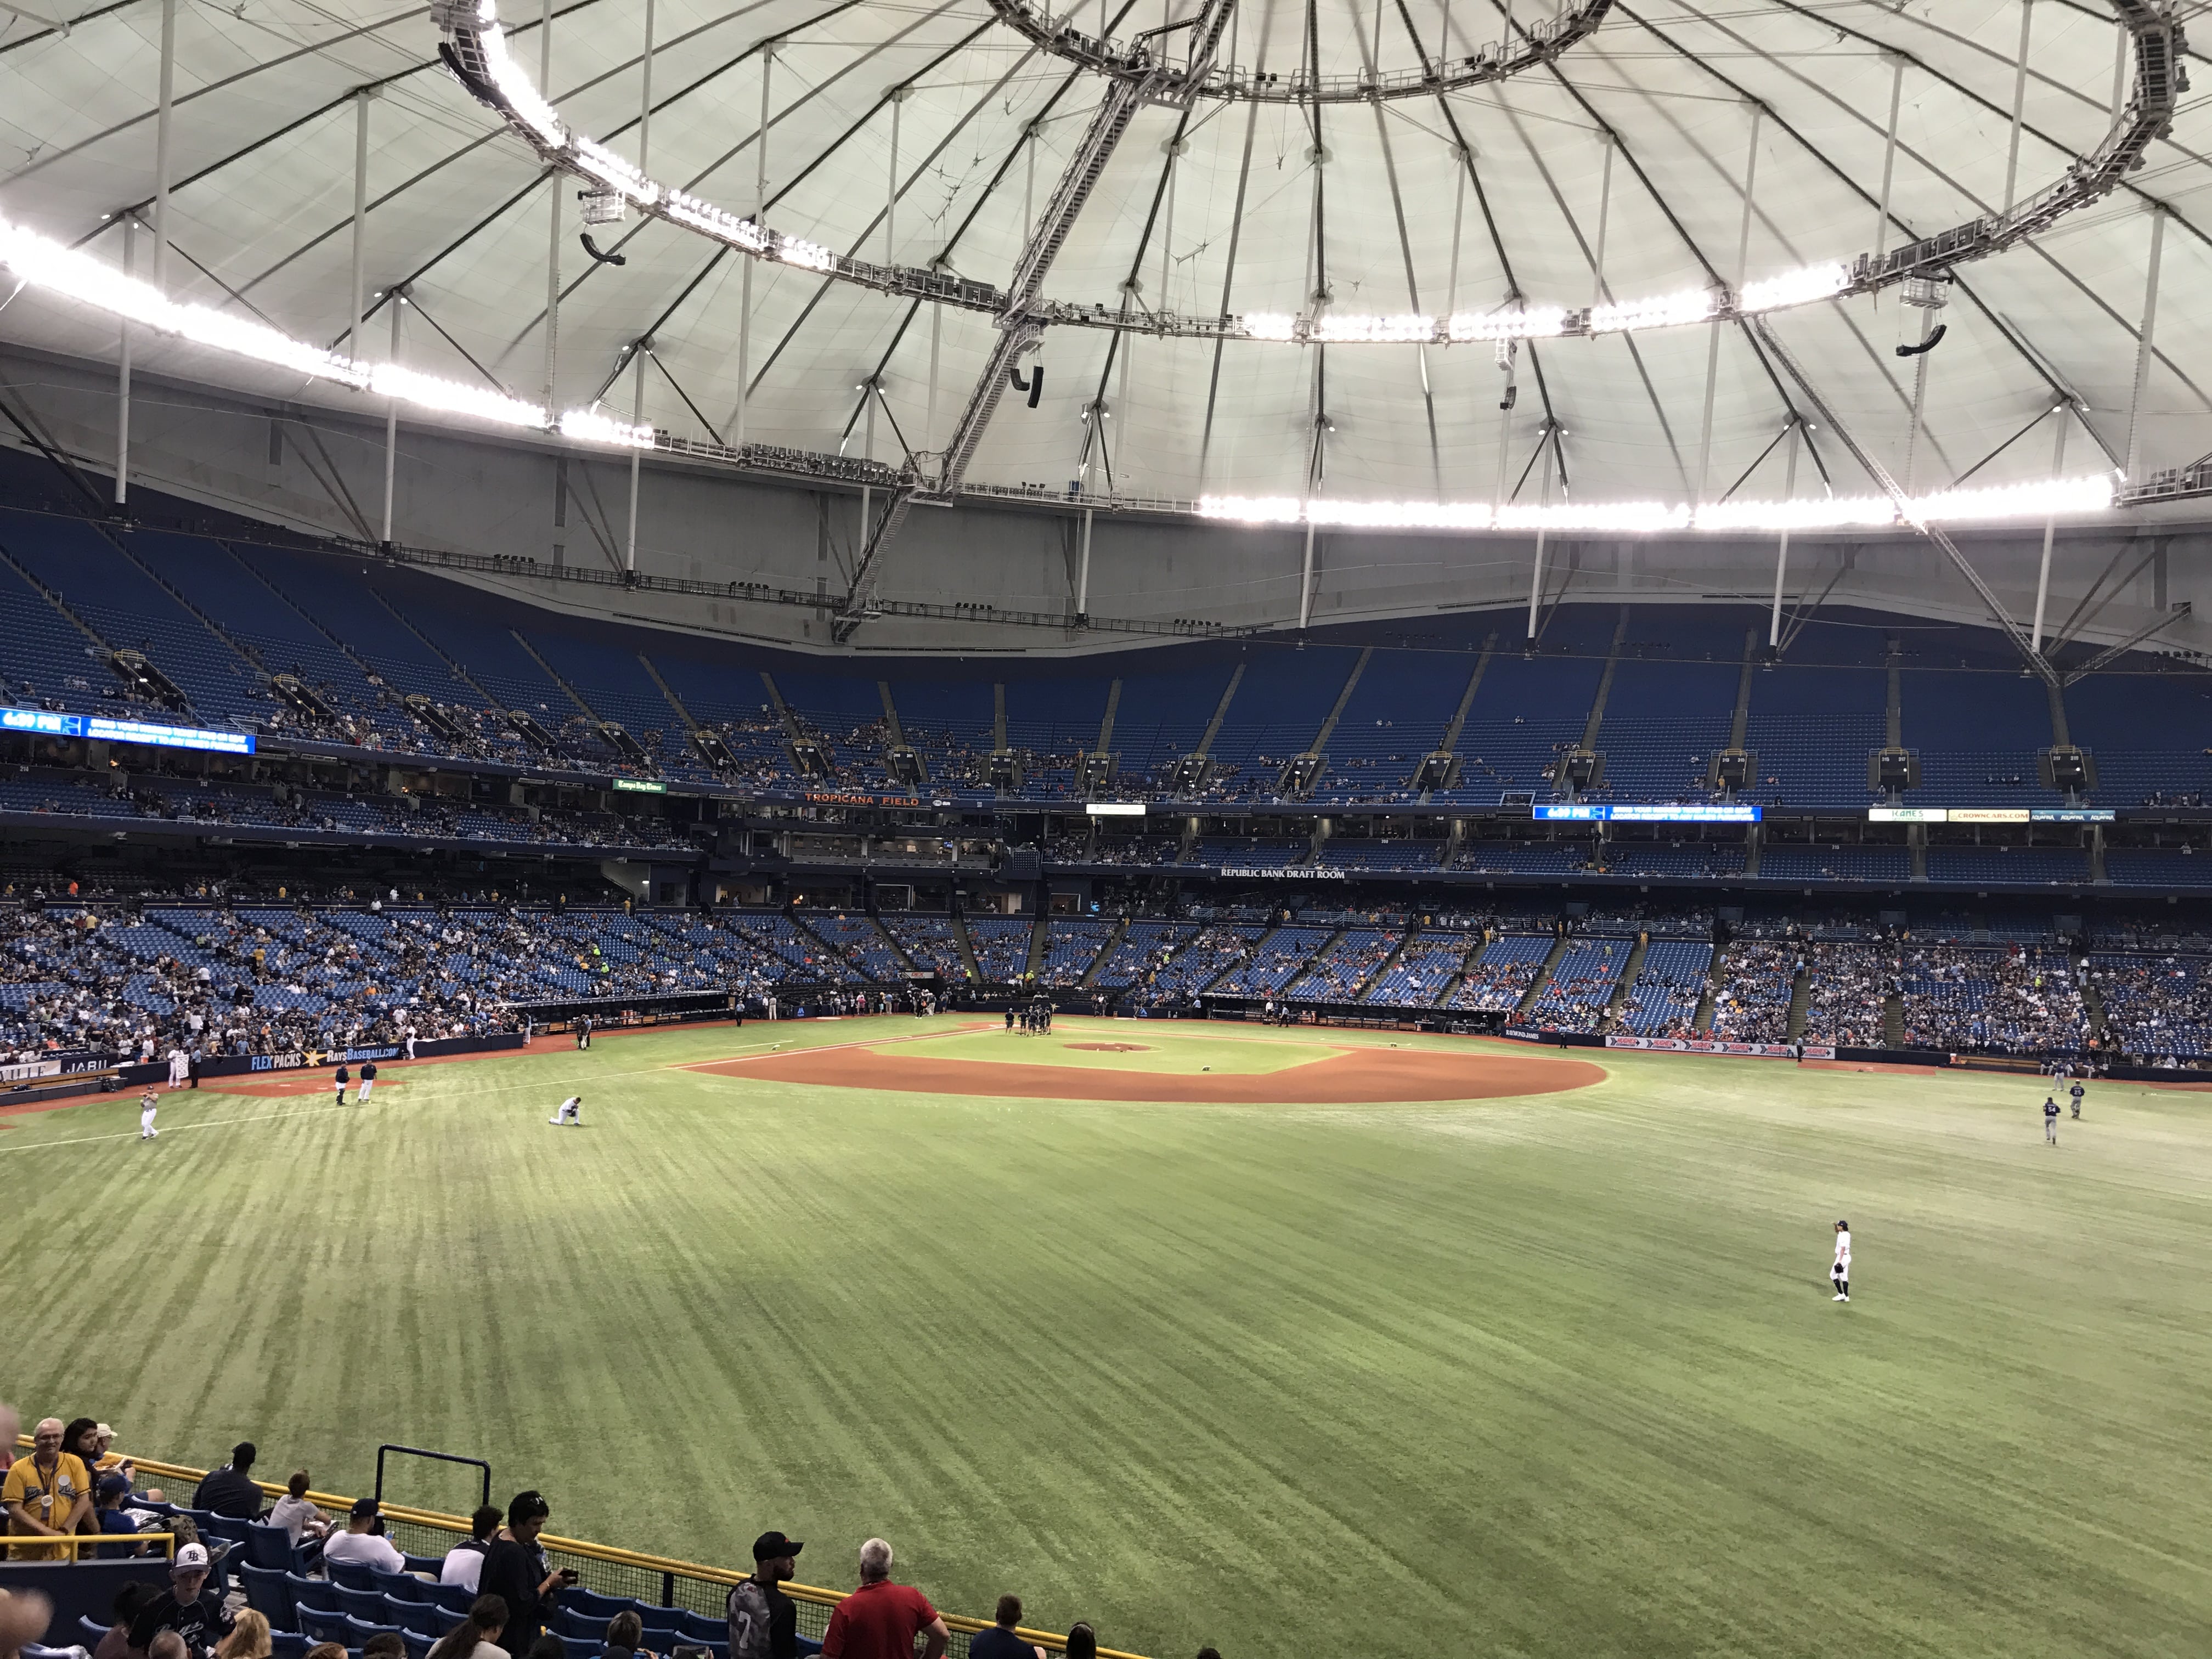 Rays announce ticket specials for 2018 season4032 x 3024